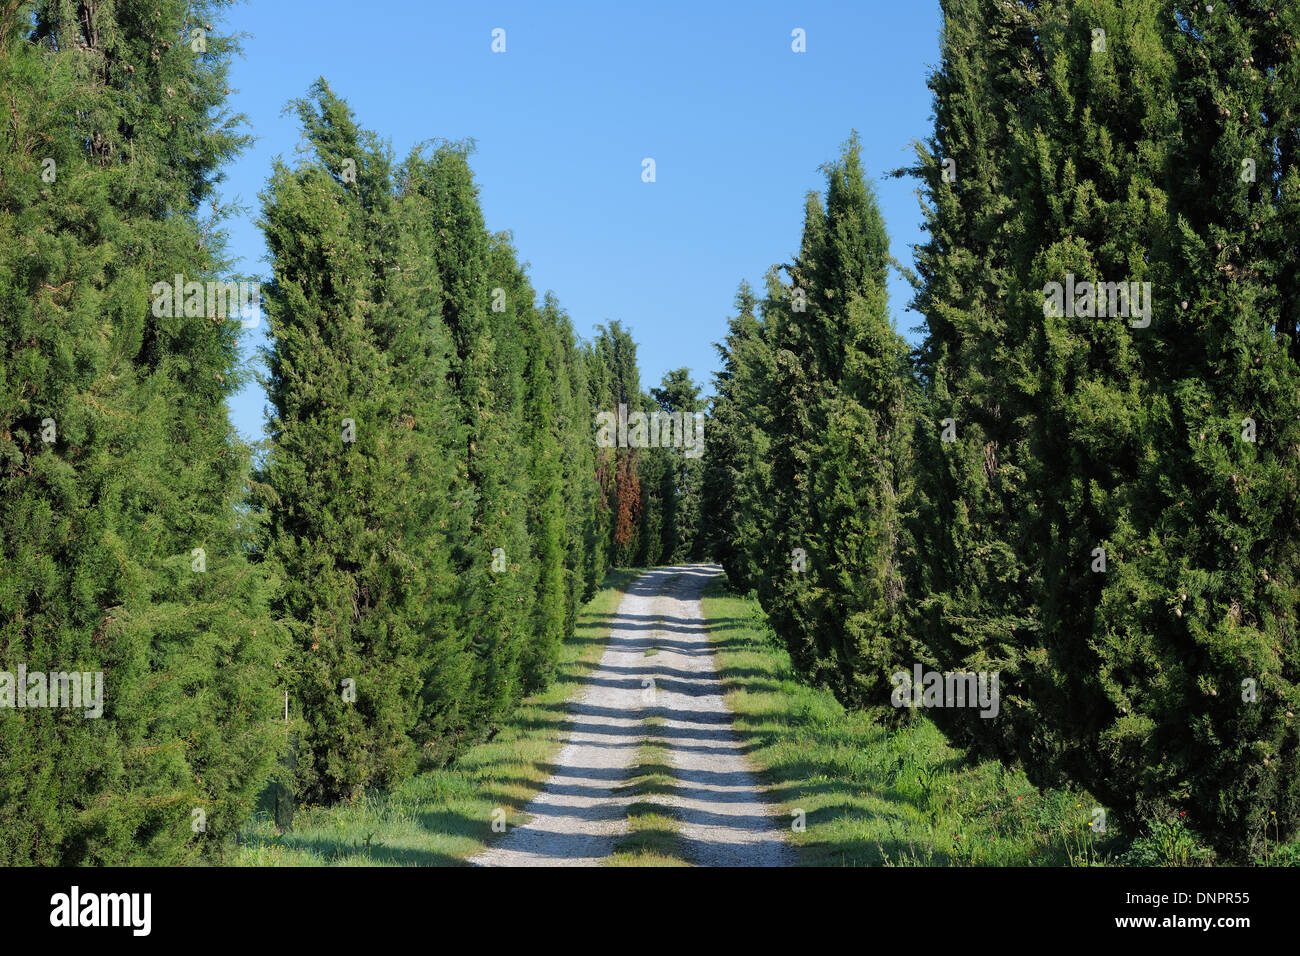 Rural dirt path lined with Cypress Trees (Cupressus sempervirens). Pienza, Siena district, Tuscany, Toscana, Italy. Stock Photo